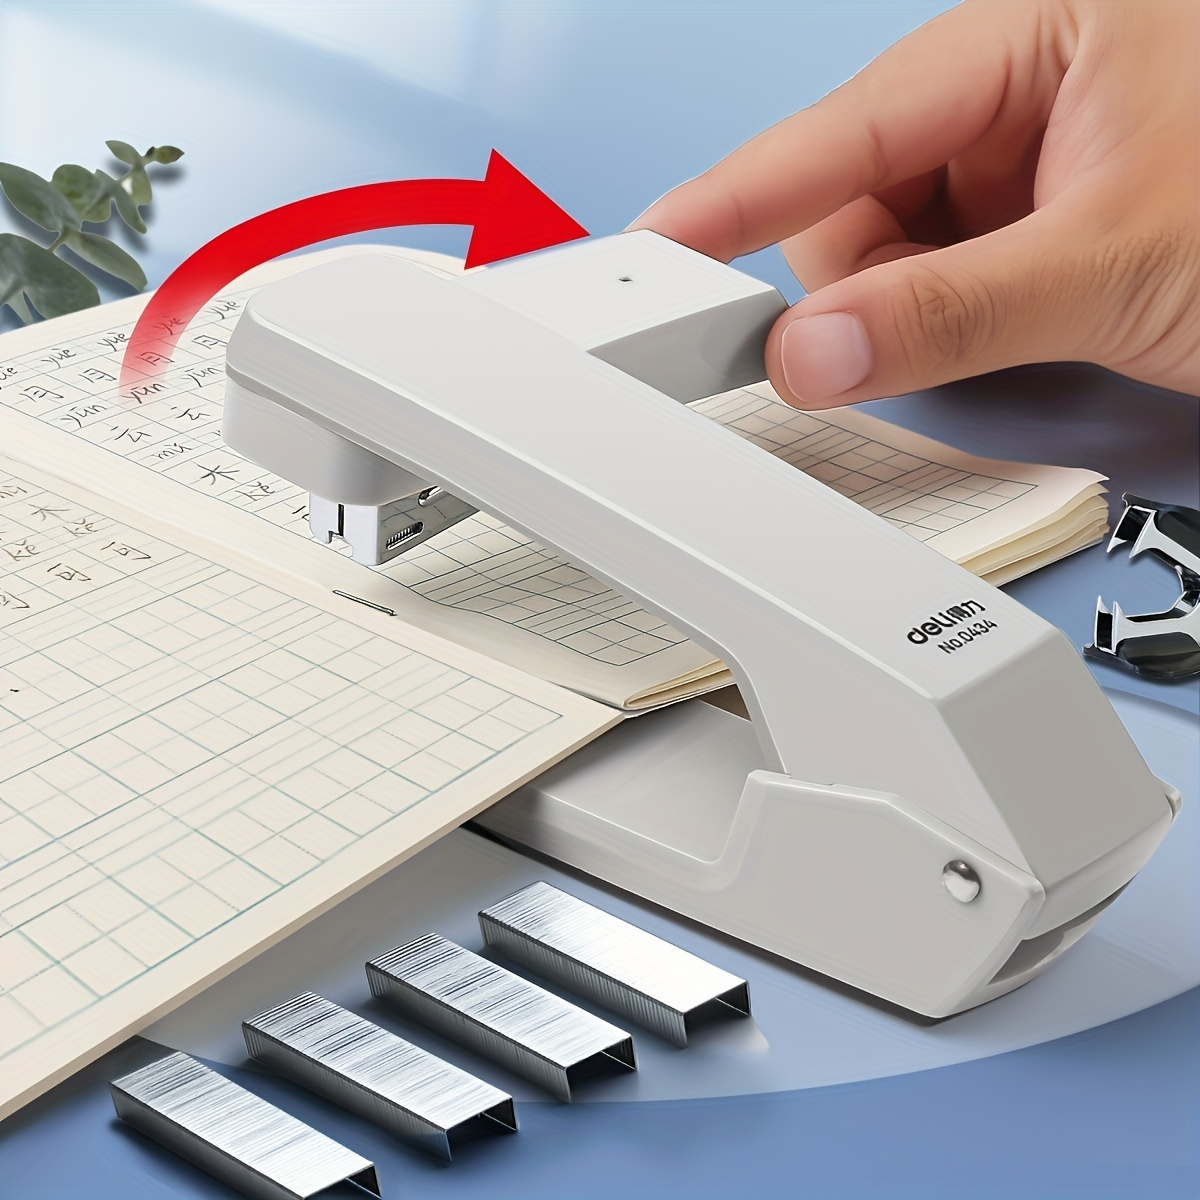 

Easy-glide Rotating Stapler For Students & Office - Binds 2-20 Sheets, Quick Staple Refill